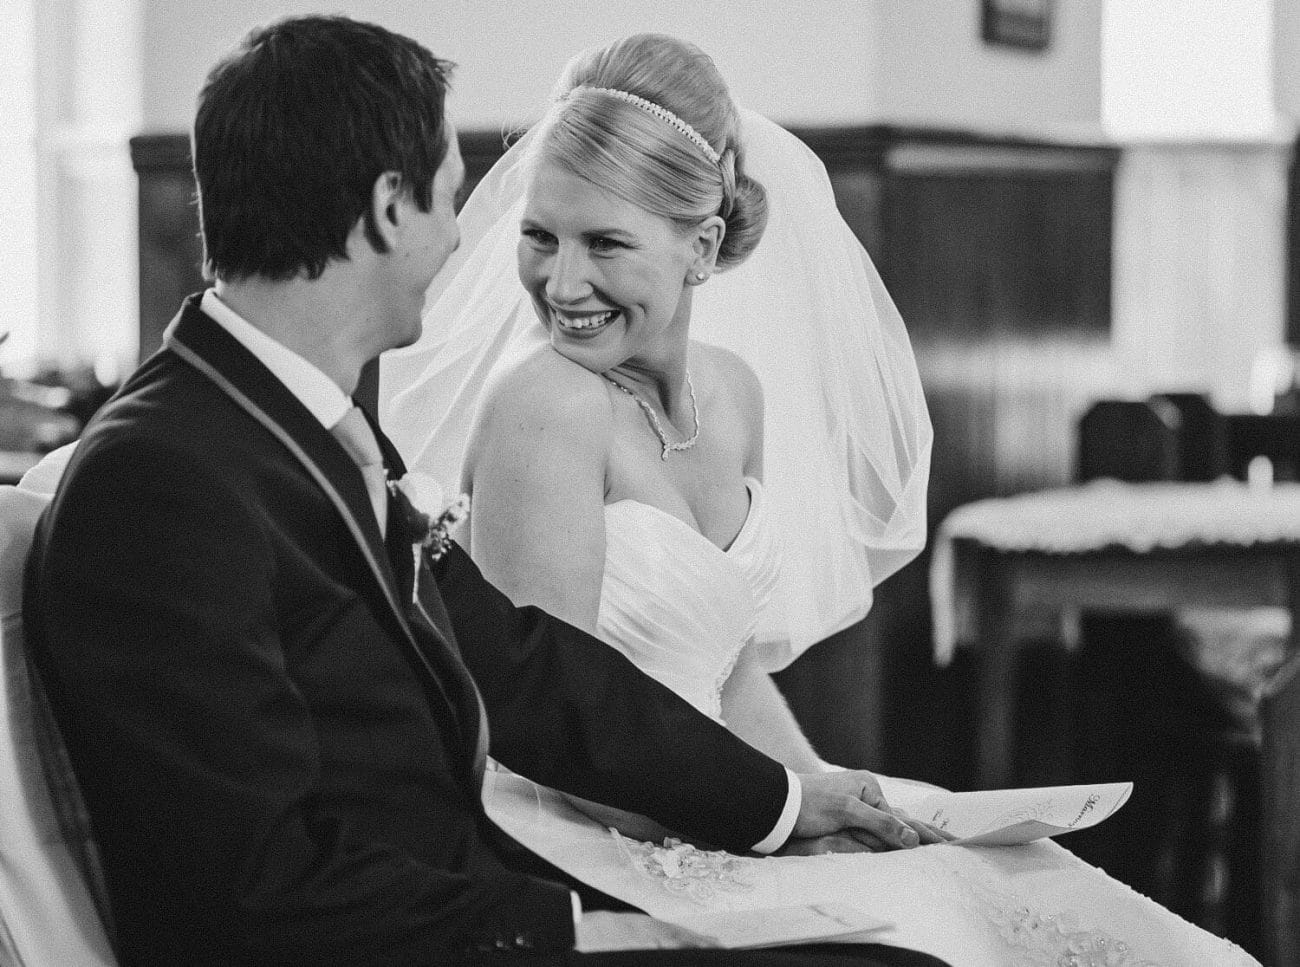 The bride smiles at her new husband as they sit together during their intimate church wedding